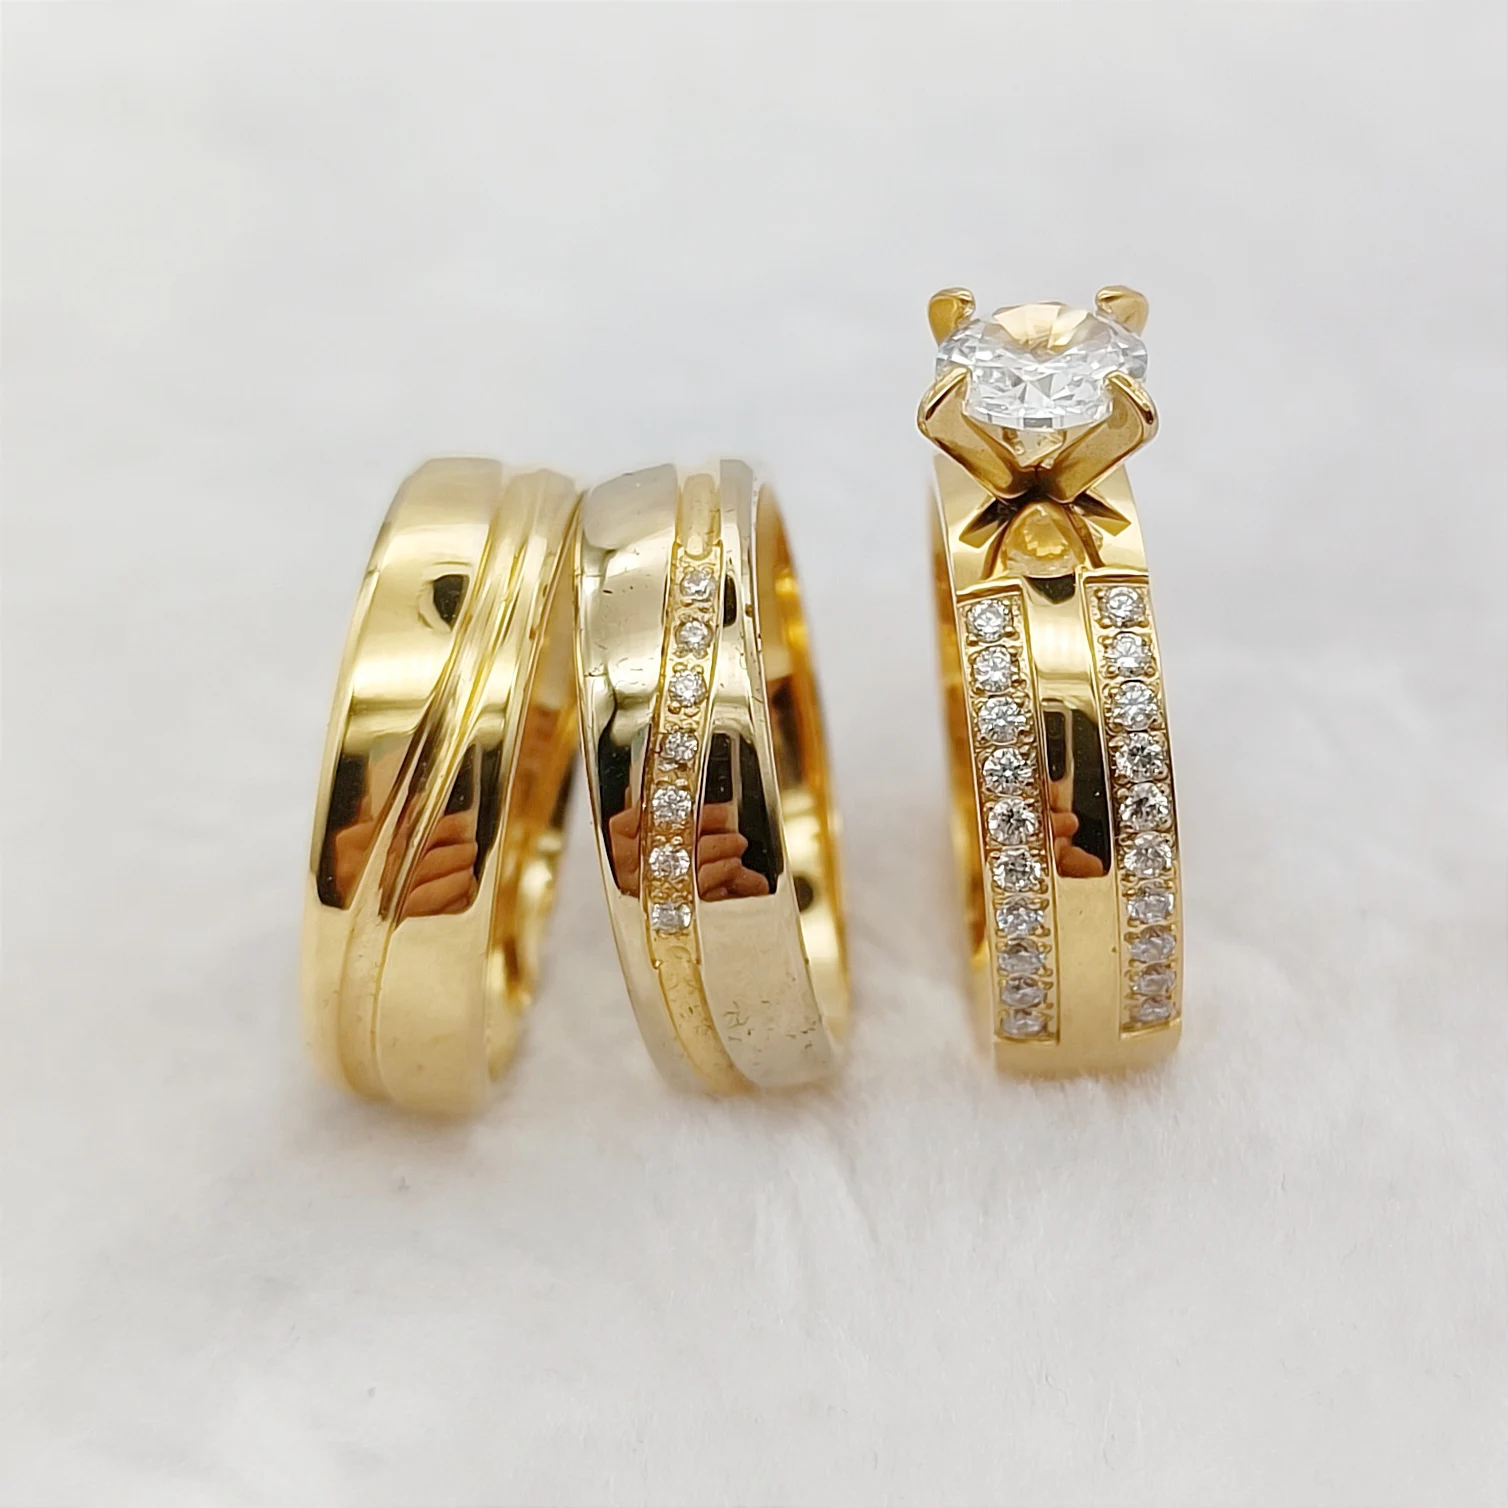 

3pcs Bridal Promise Wedding Engagement Rings Sets For Couples Lovers Fashion 24k Gold Plated Jewelry Ring